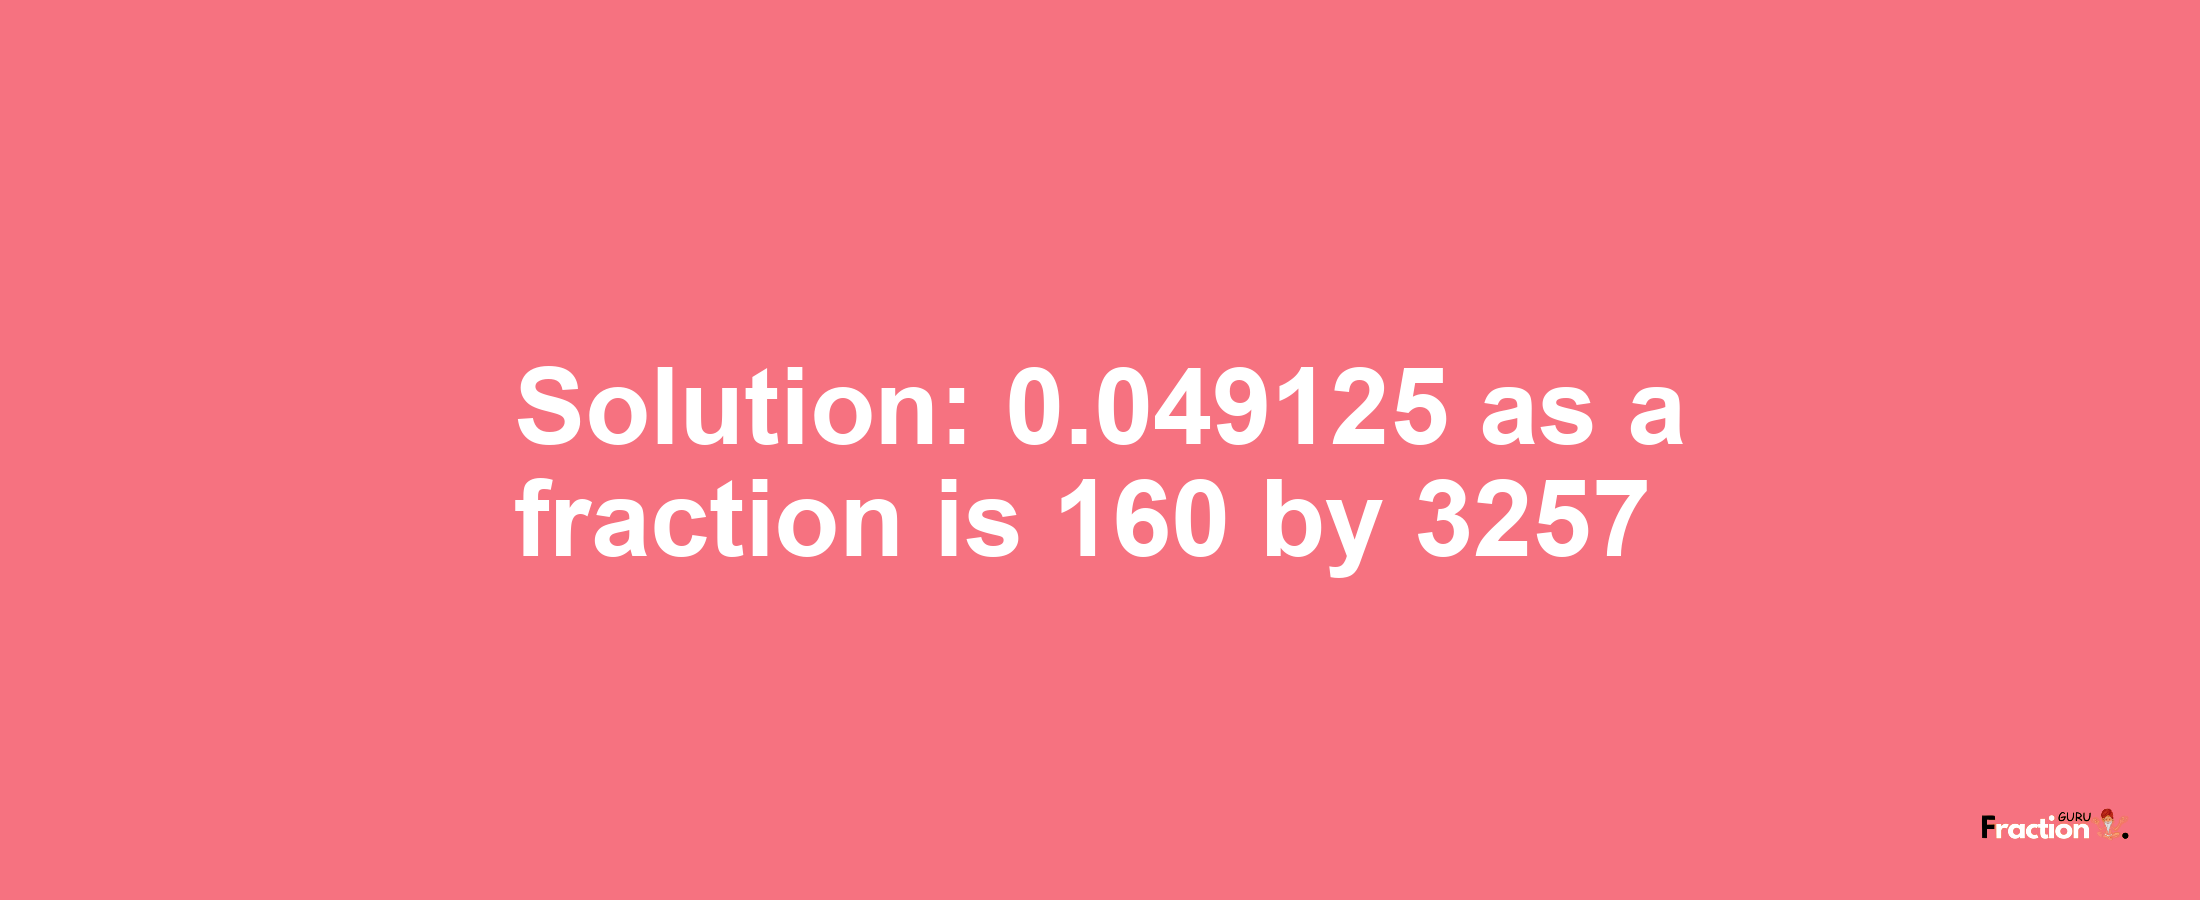 Solution:0.049125 as a fraction is 160/3257